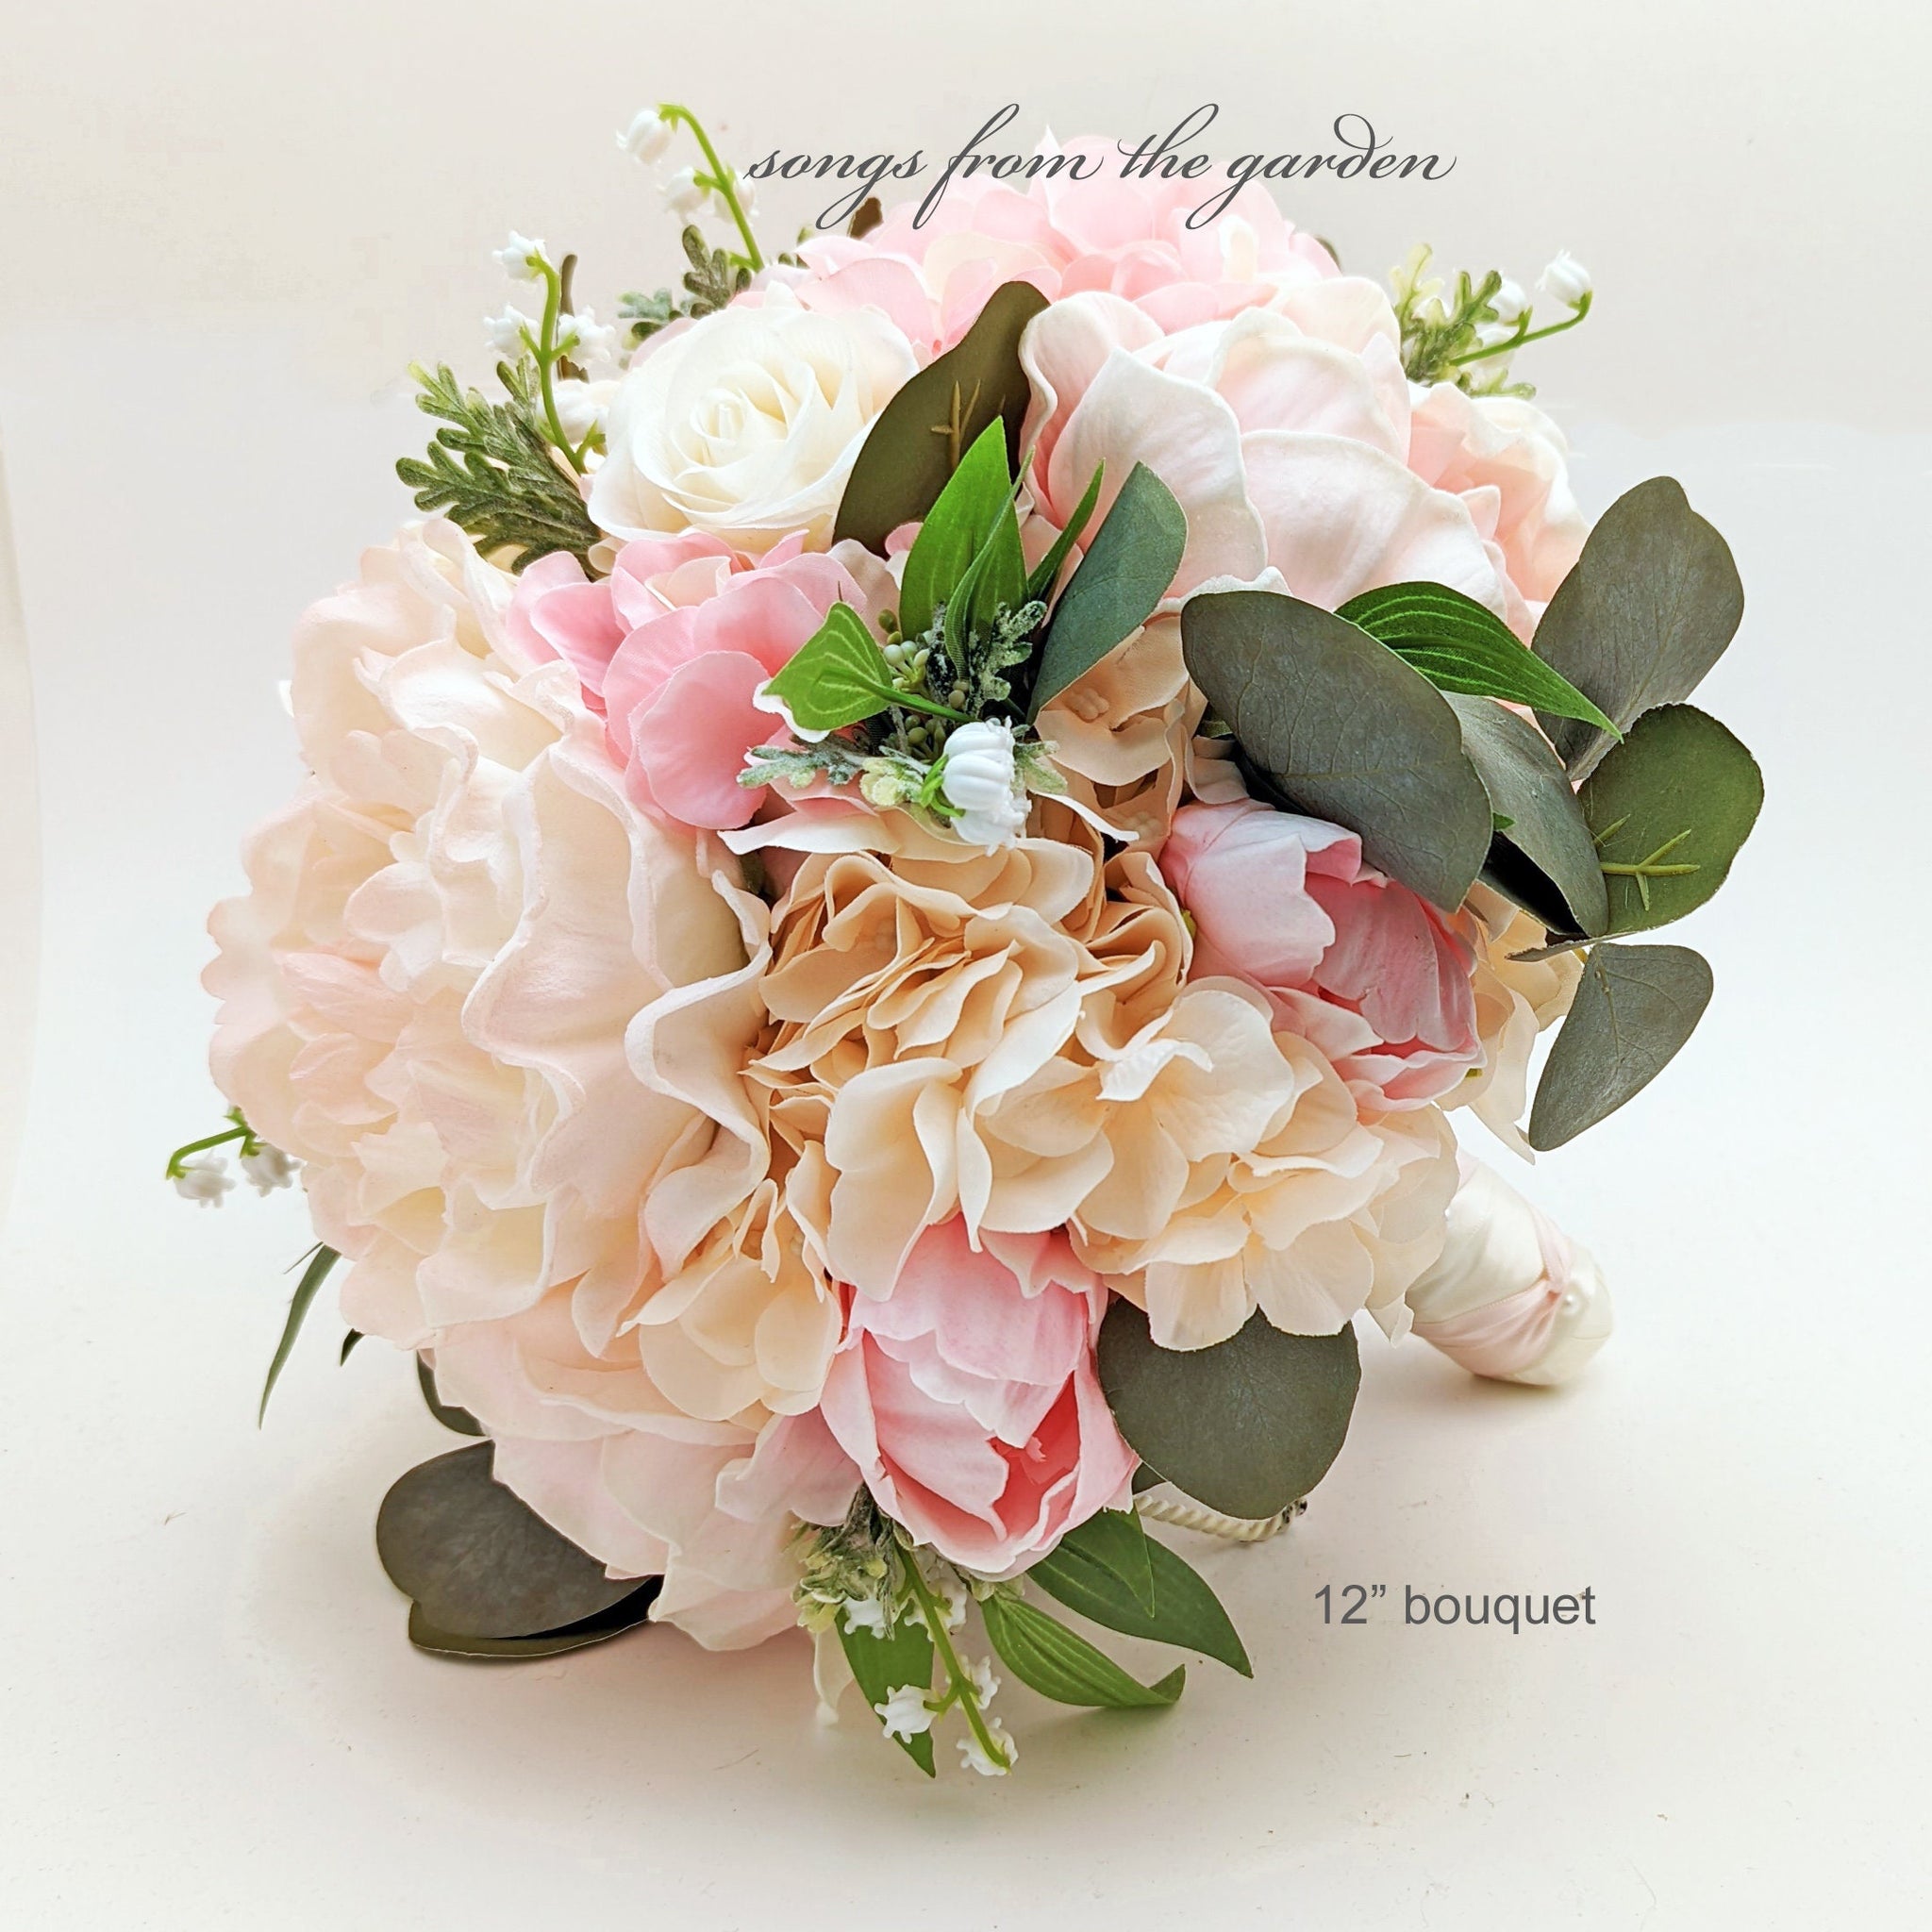 Bridal Bridesmaid Wedding Bouquet Eucalyptus Lily of the Valley Peonies Roses Hydrangea Peach Pink White - Add Boutonniere Flower Crown More